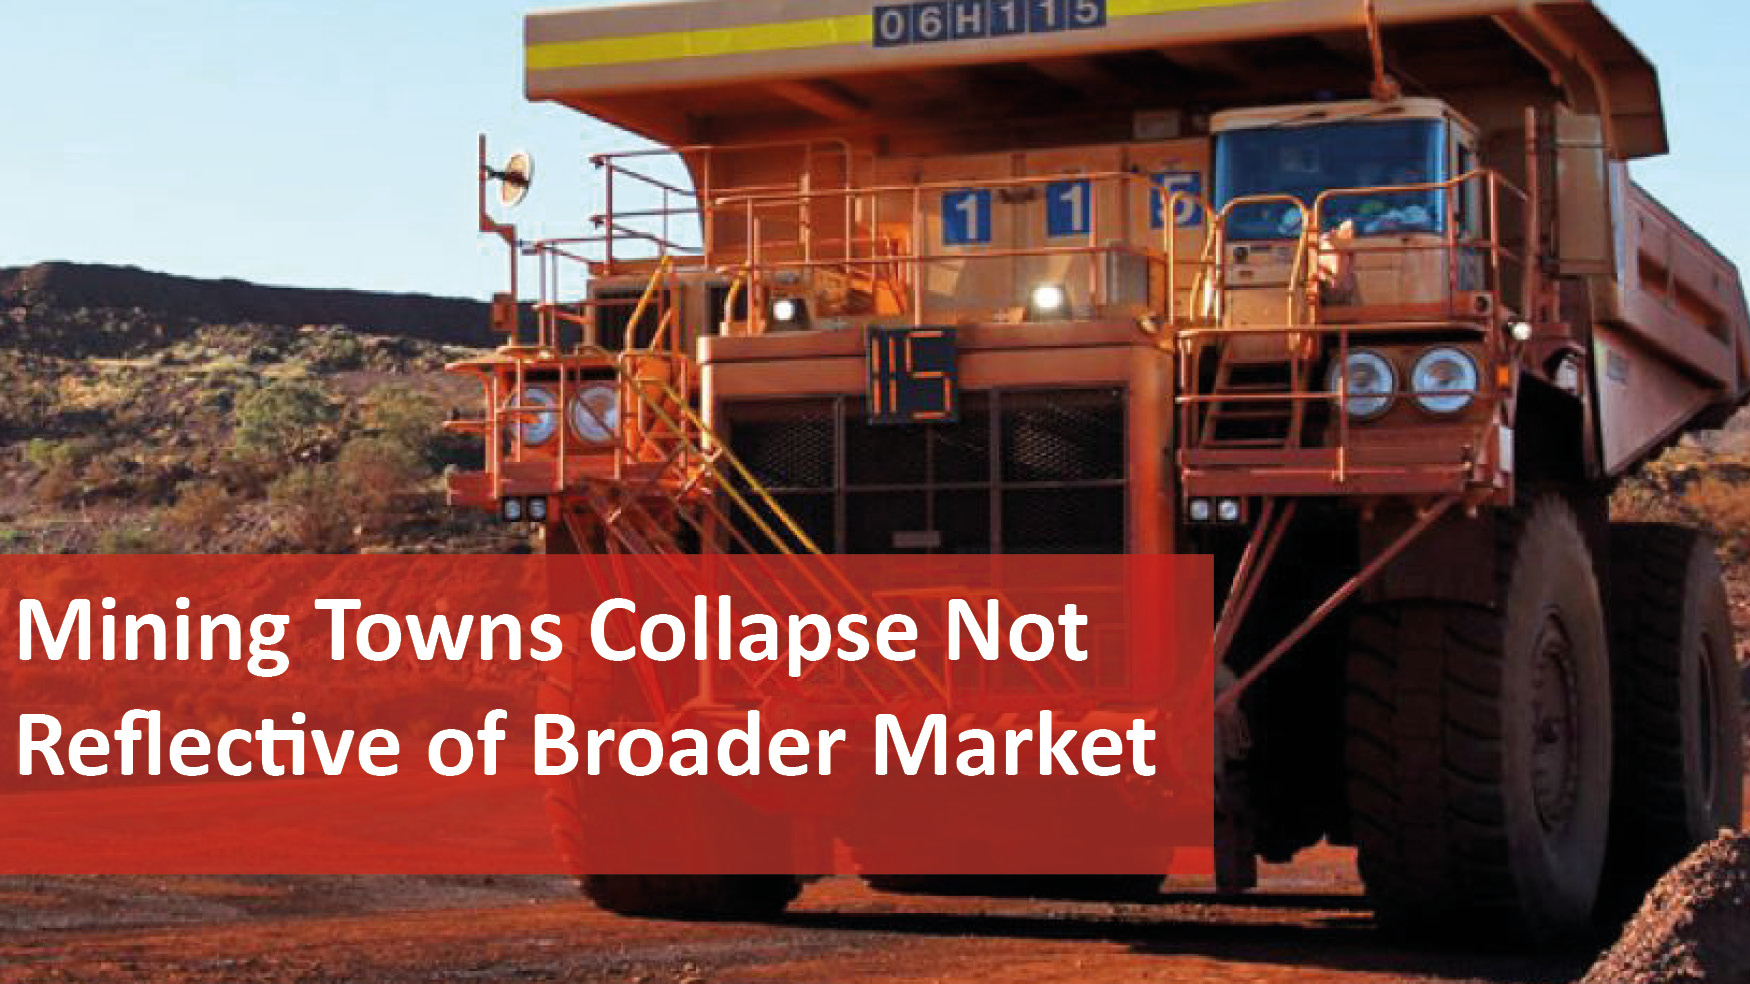 We Love Rentals Mining Towns Collapse Not Reflective of Broader Market